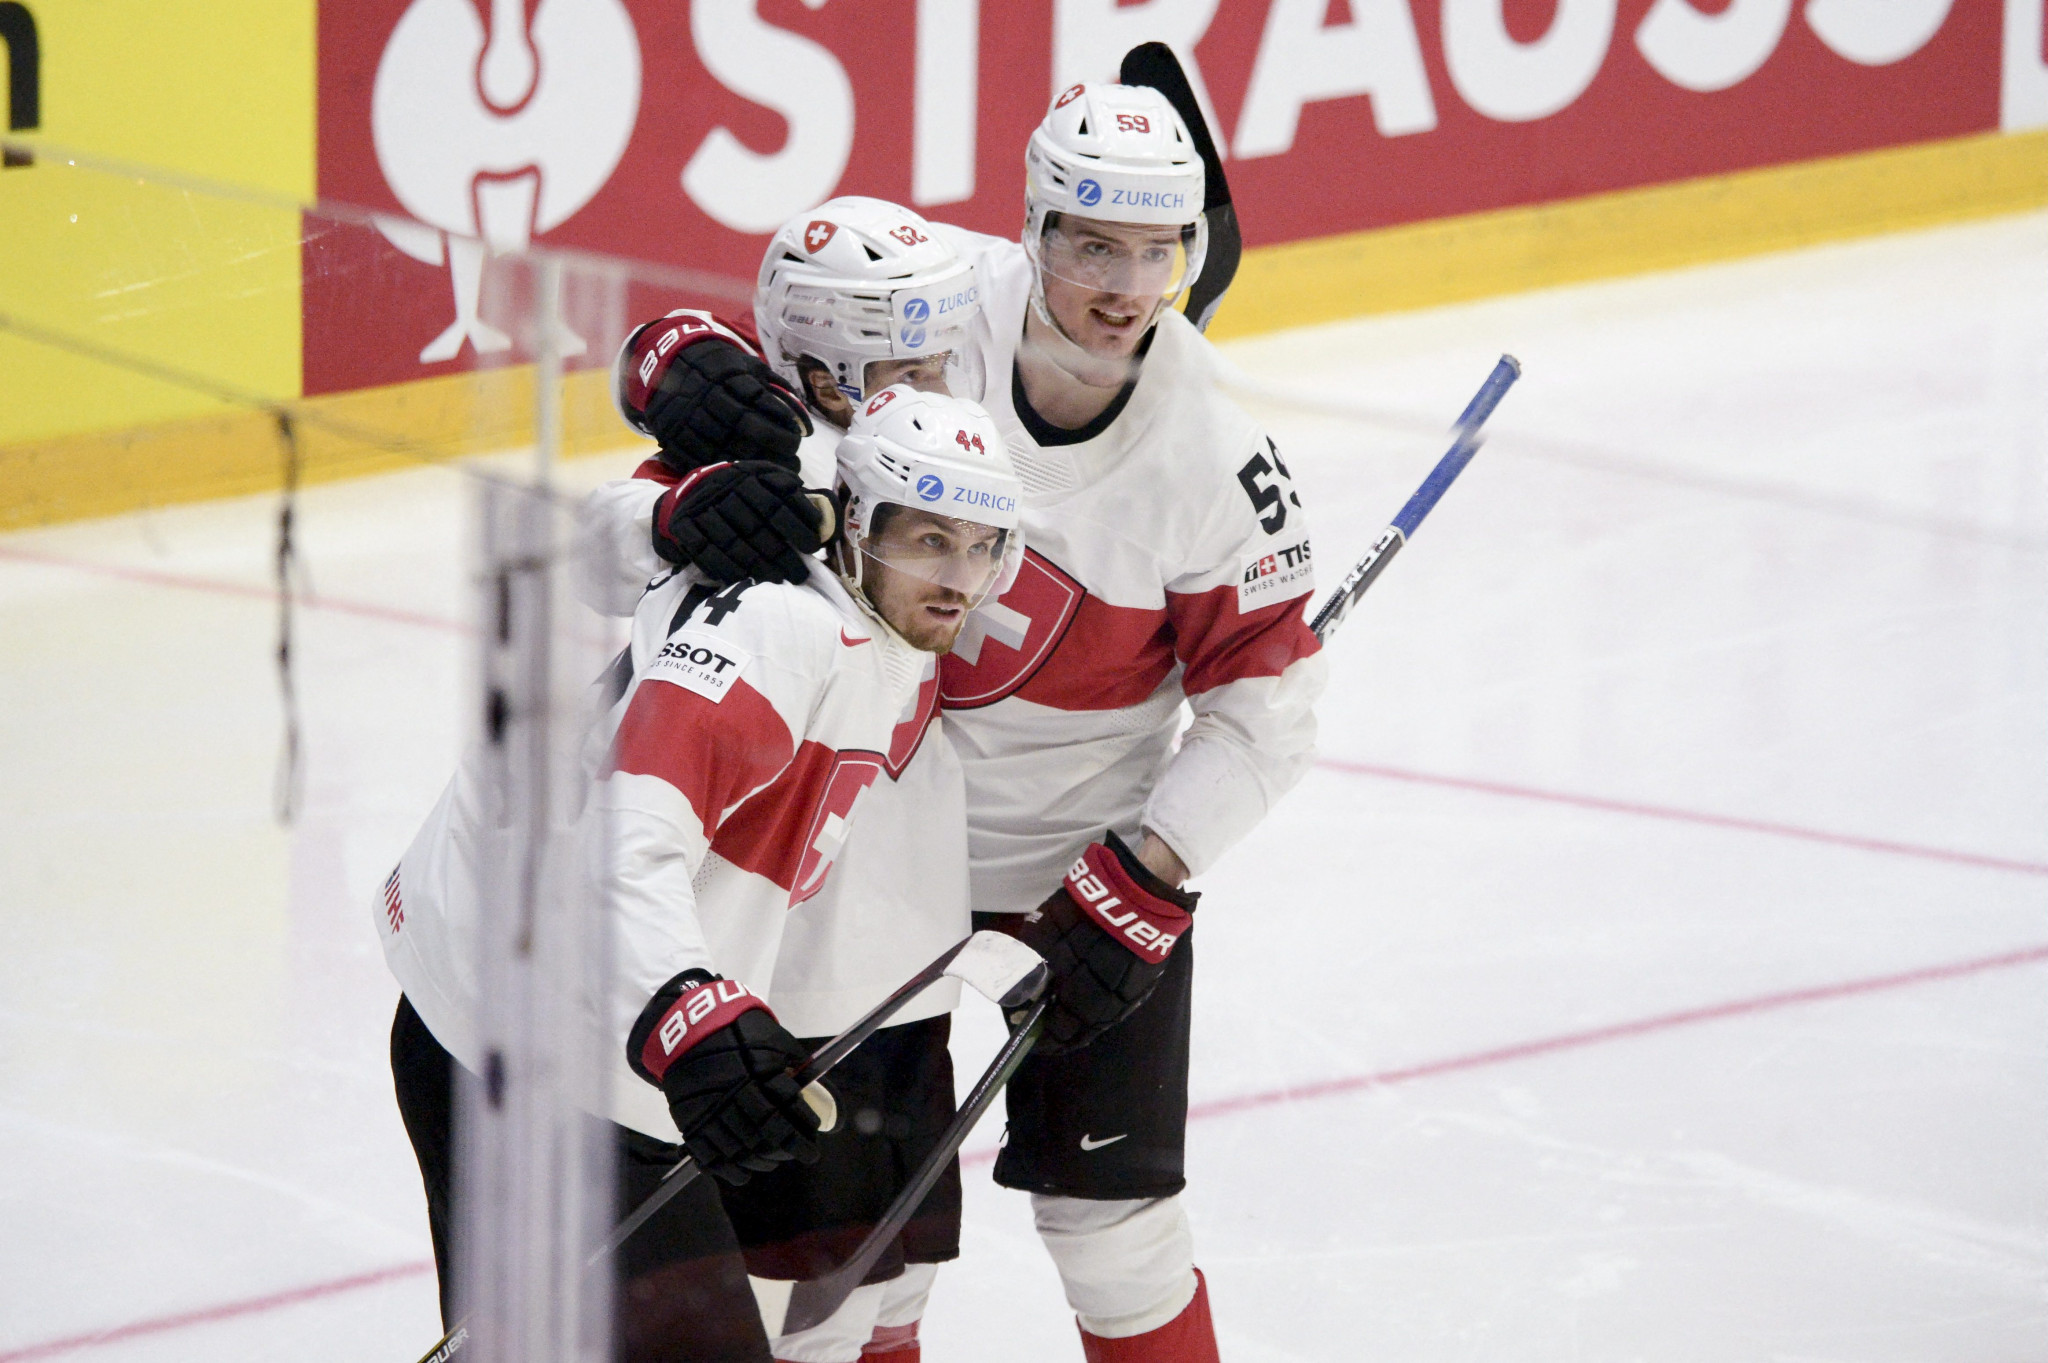 Switzerland sweep aside Canada in Group A clash at IIHF World Championship